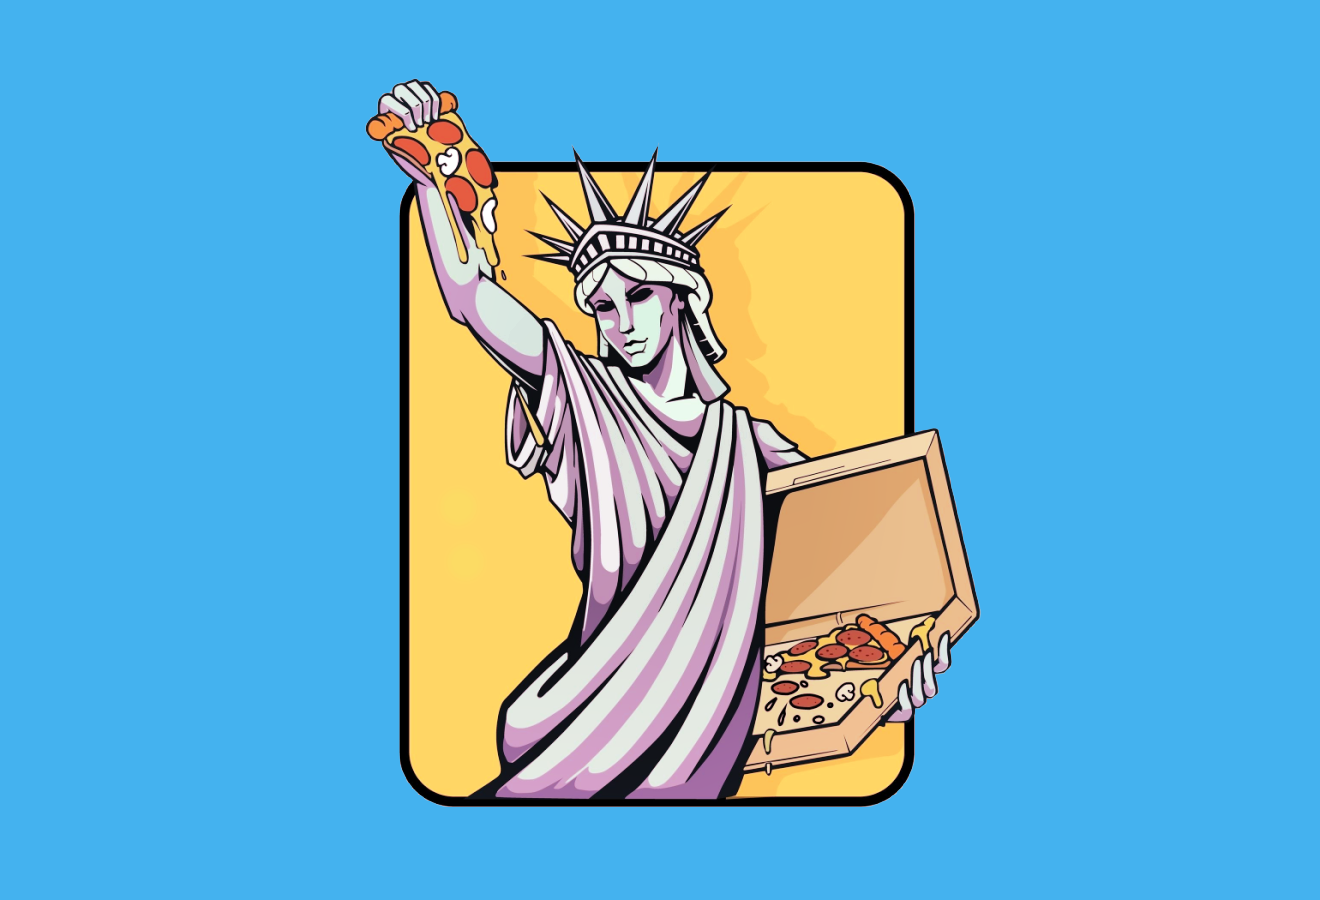 Statue of Liberty holding pizza